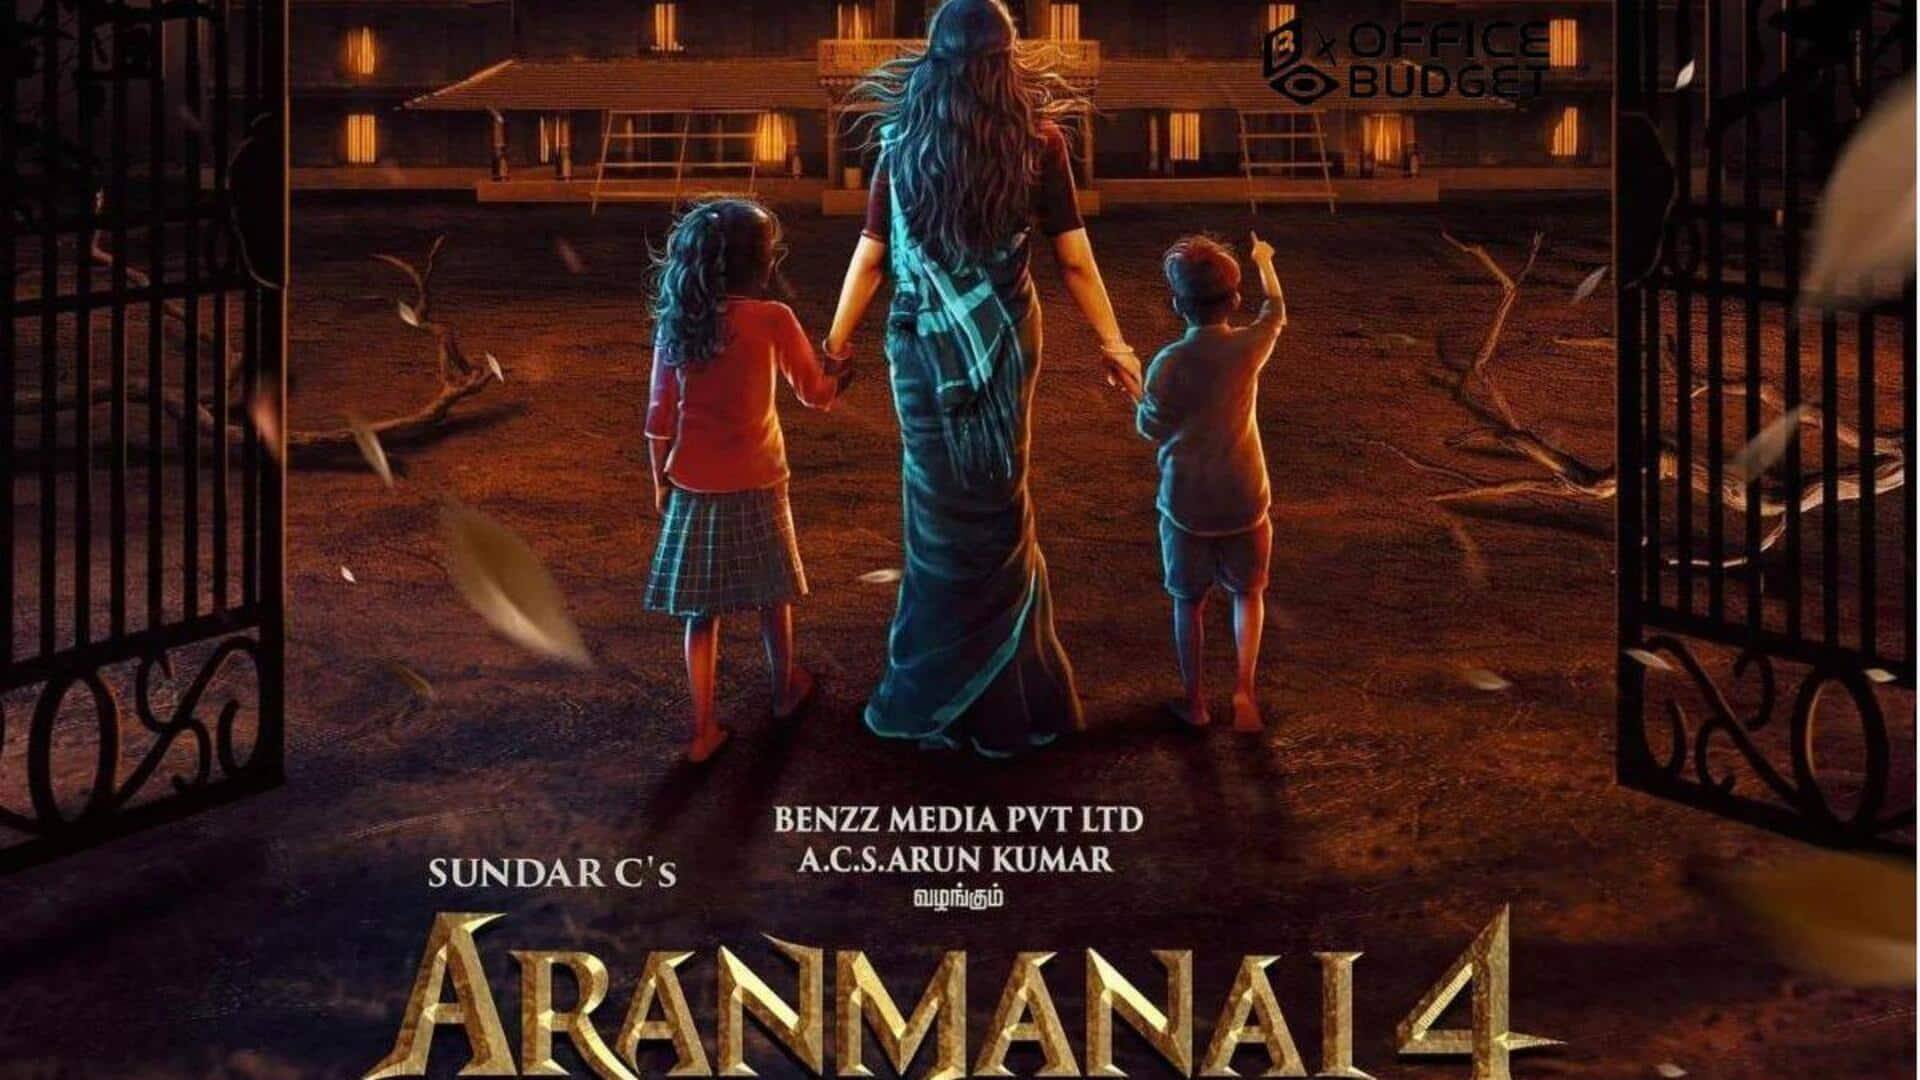 Box office: 'Aranmanai 4' earns nearly ₹4cr on opening day